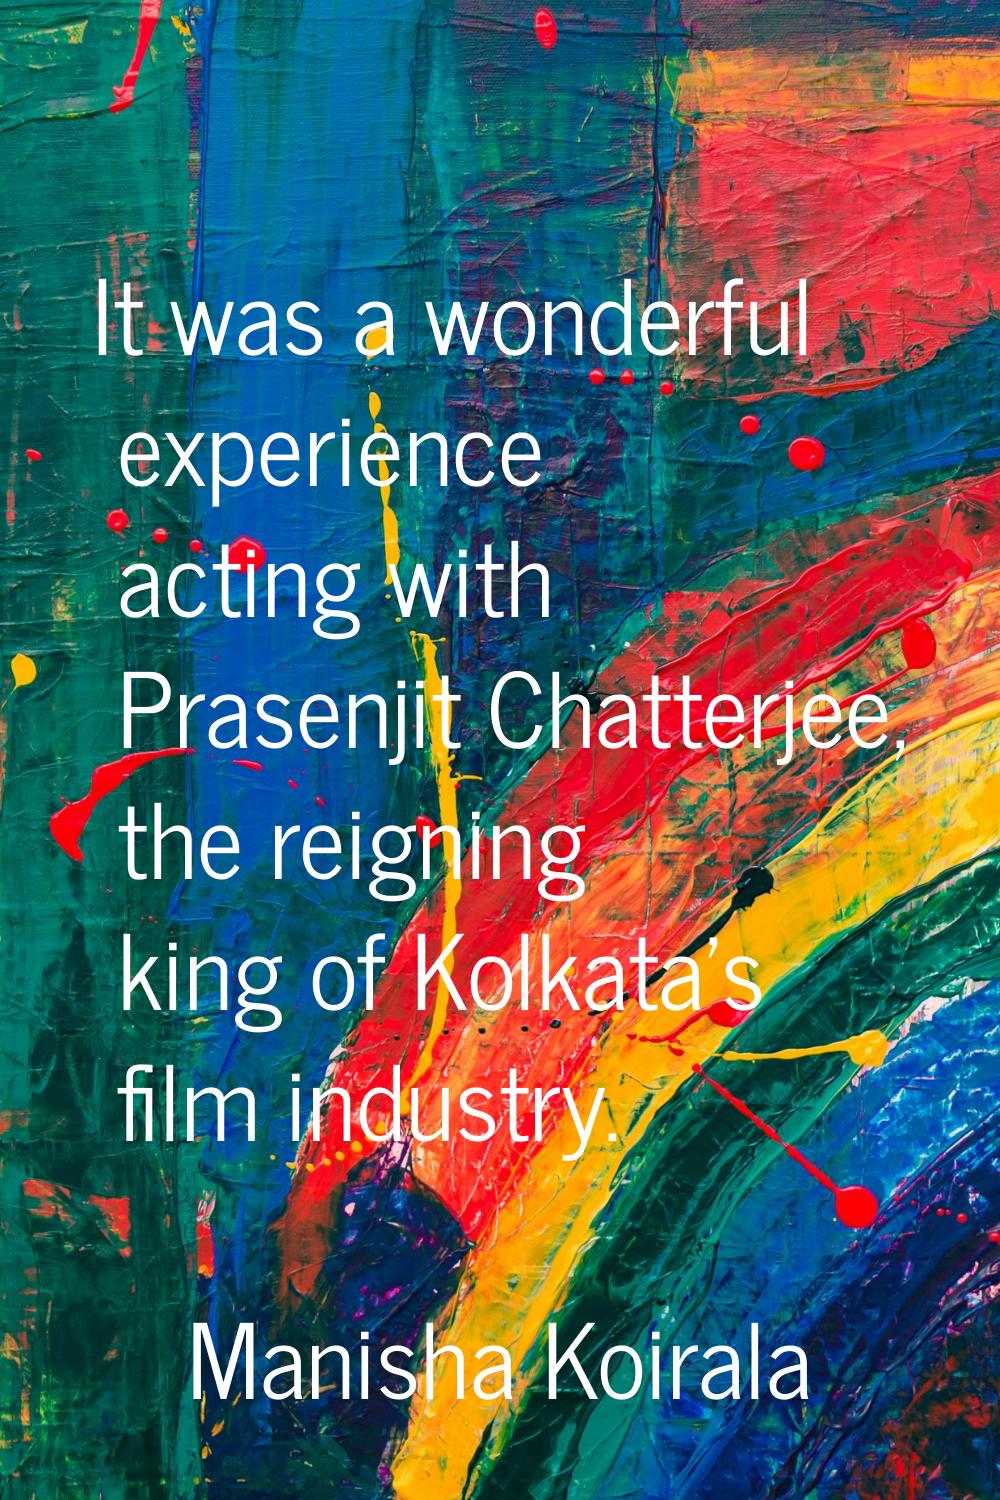 It was a wonderful experience acting with Prasenjit Chatterjee, the reigning king of Kolkata's film